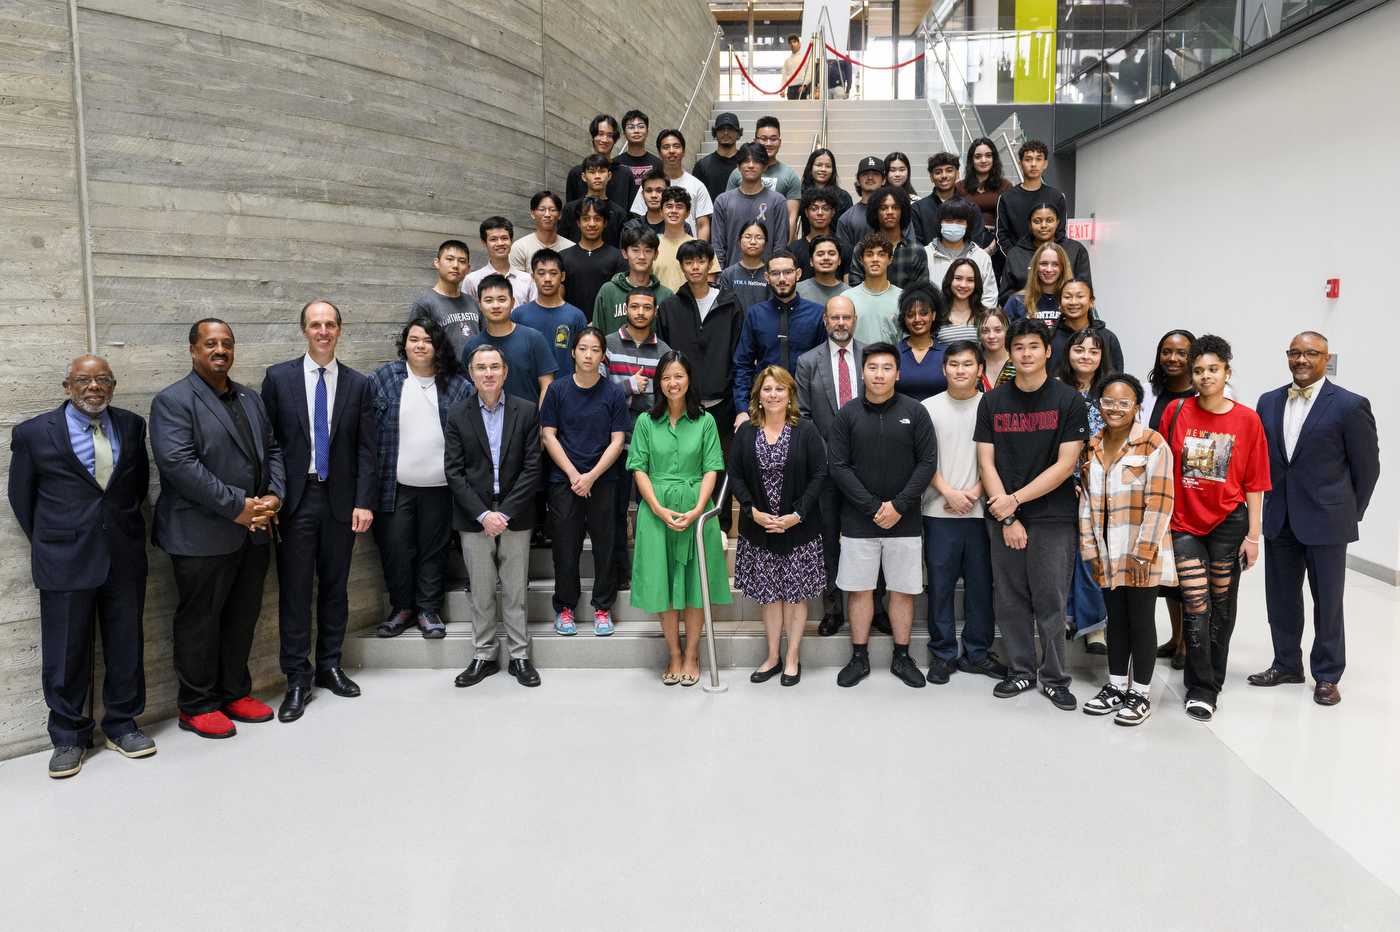 BPS students posing with Mayor Michelle Wu, Michael Armini, Ken Henderson, and other members of the Northeastern community